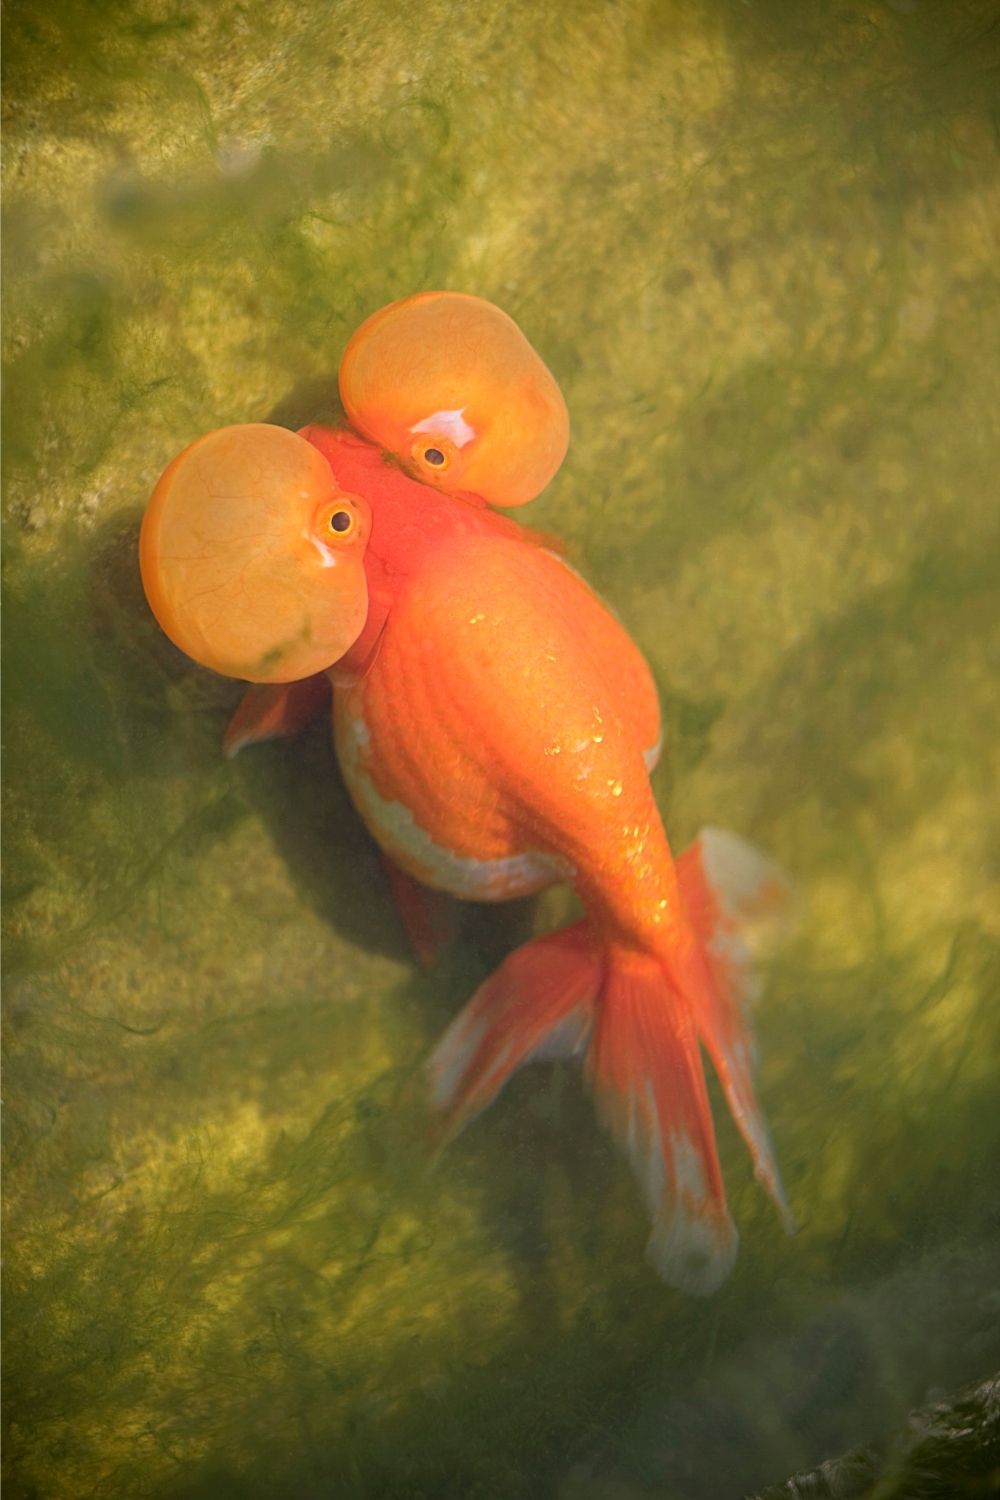 A goldfish that appears to be overweight and stays that way for quite some time might have Dropsy